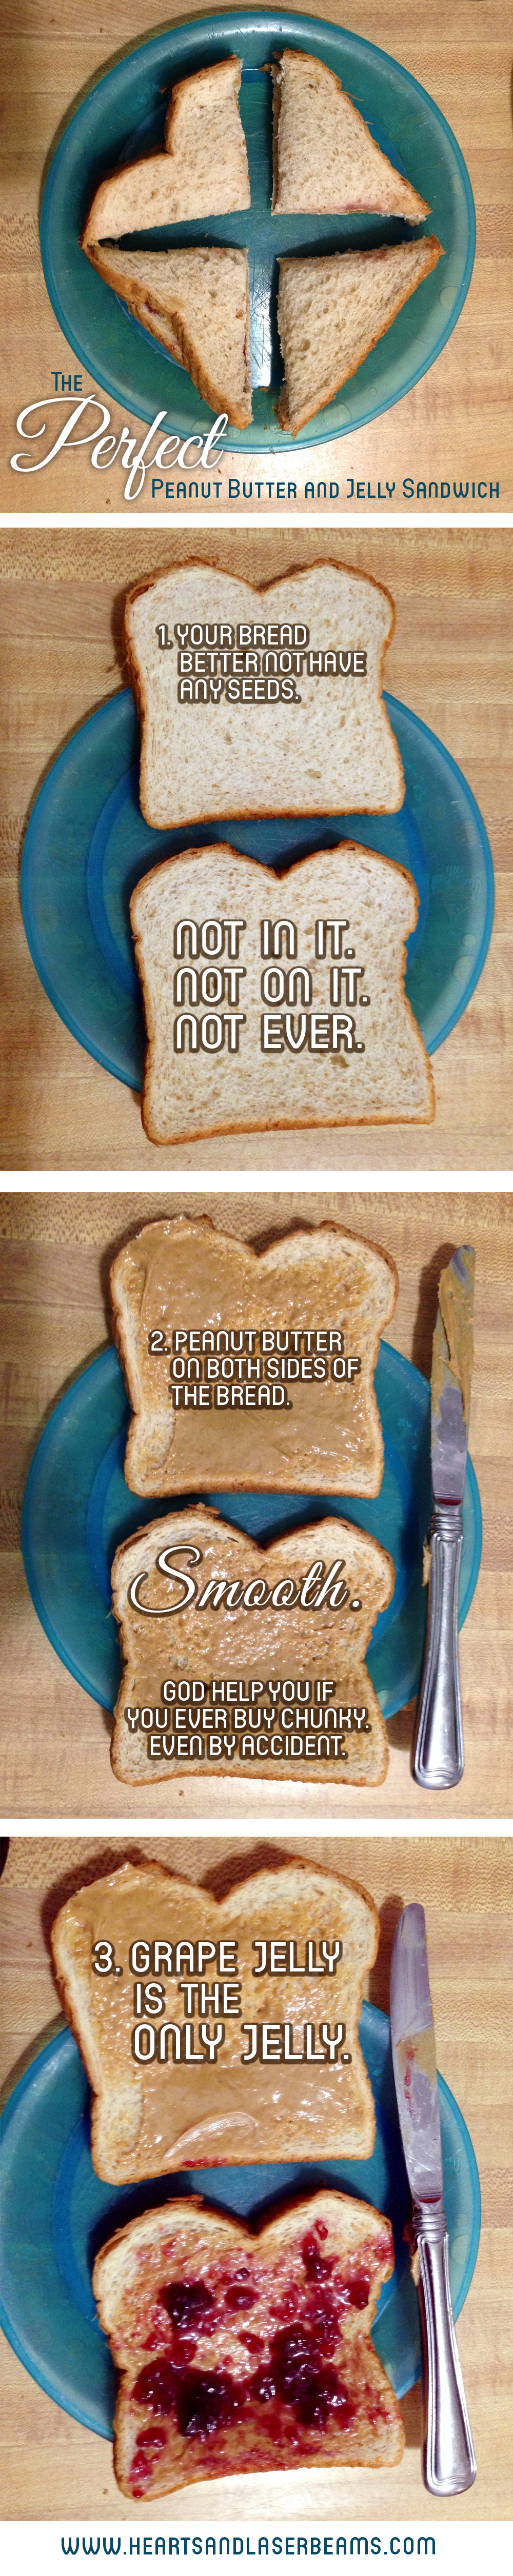 Steps to The Perfect Peanut Butter and Jelly Sandwich - Hearts and Laserbeams